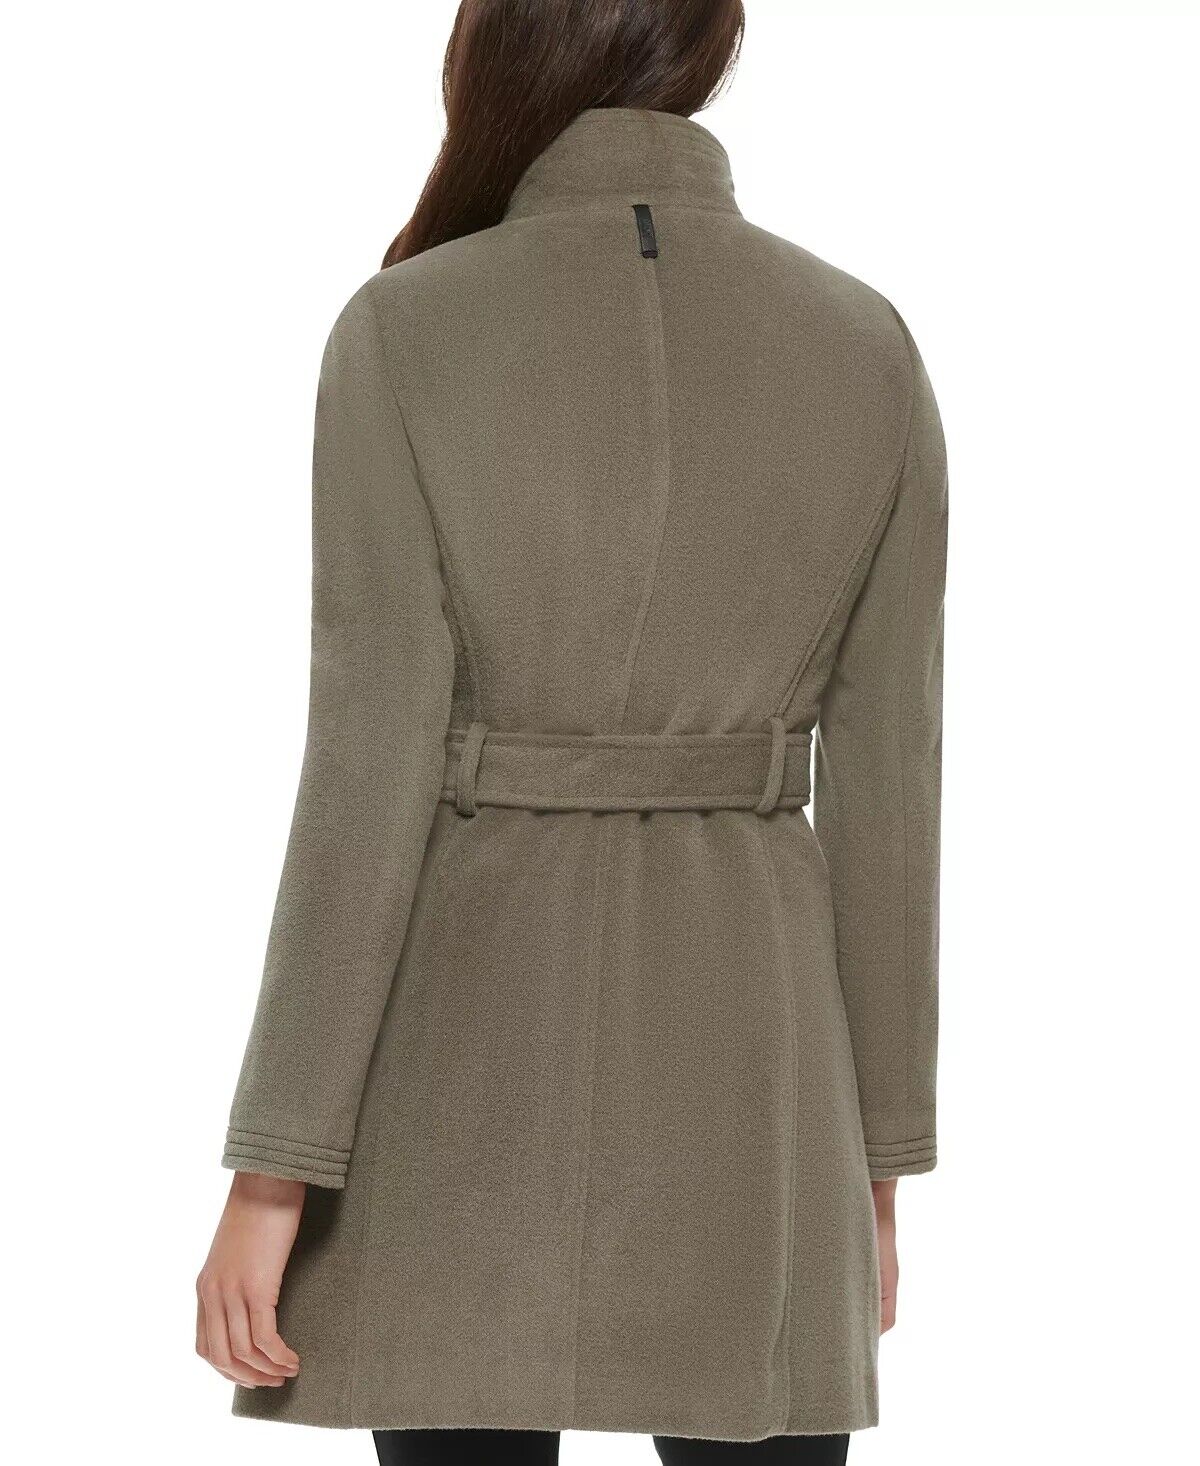 DKNY Women's Stand-Collar Button-Front Belted Coat Sage Green XL